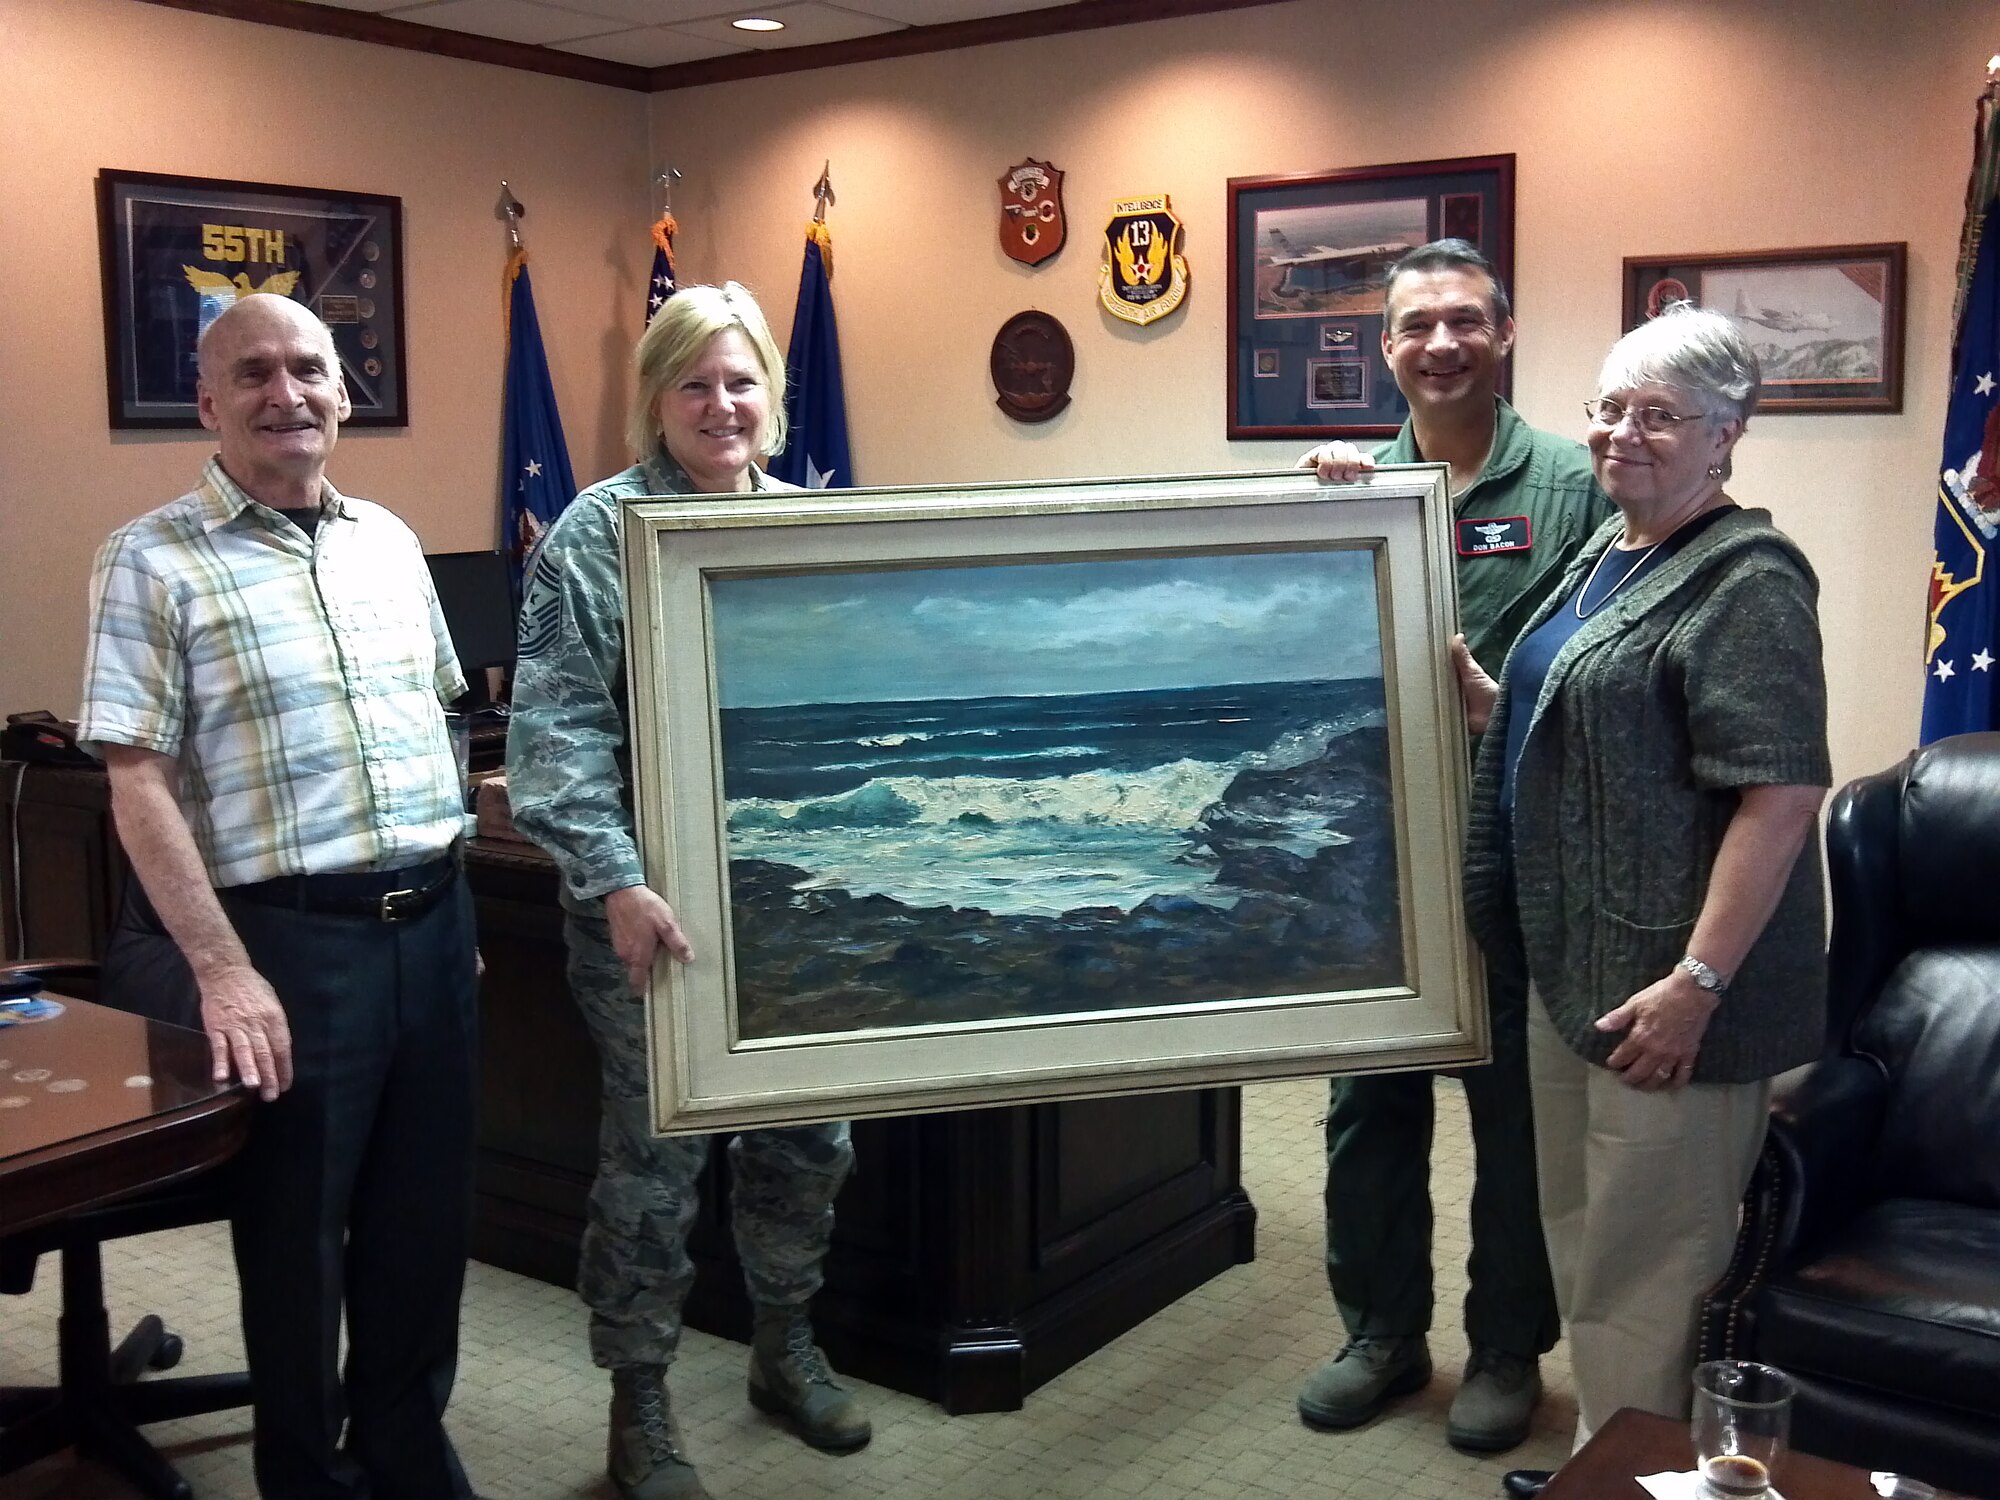 Pete Vidito and his wife Judy present Brig. Gen. Donald Bacon, 55th Wing commander, and Chief Master Sgt. Suzan Sangster, 55th Wing command chief, with a Helen LeMay painting in the 55th Wing headquarters building on Offutt Air Force Base, Neb., Oct. 6. Helen LeMay was the wife of Gen. Curtis E. LeMay, former chief of staff of the Air Force and namesake for the Gen. Curtis E. LeMay Foundation that helps widows of retired military personnel. (U.S. Air Force photo by Capt. Gregory M. Guevara/Released)